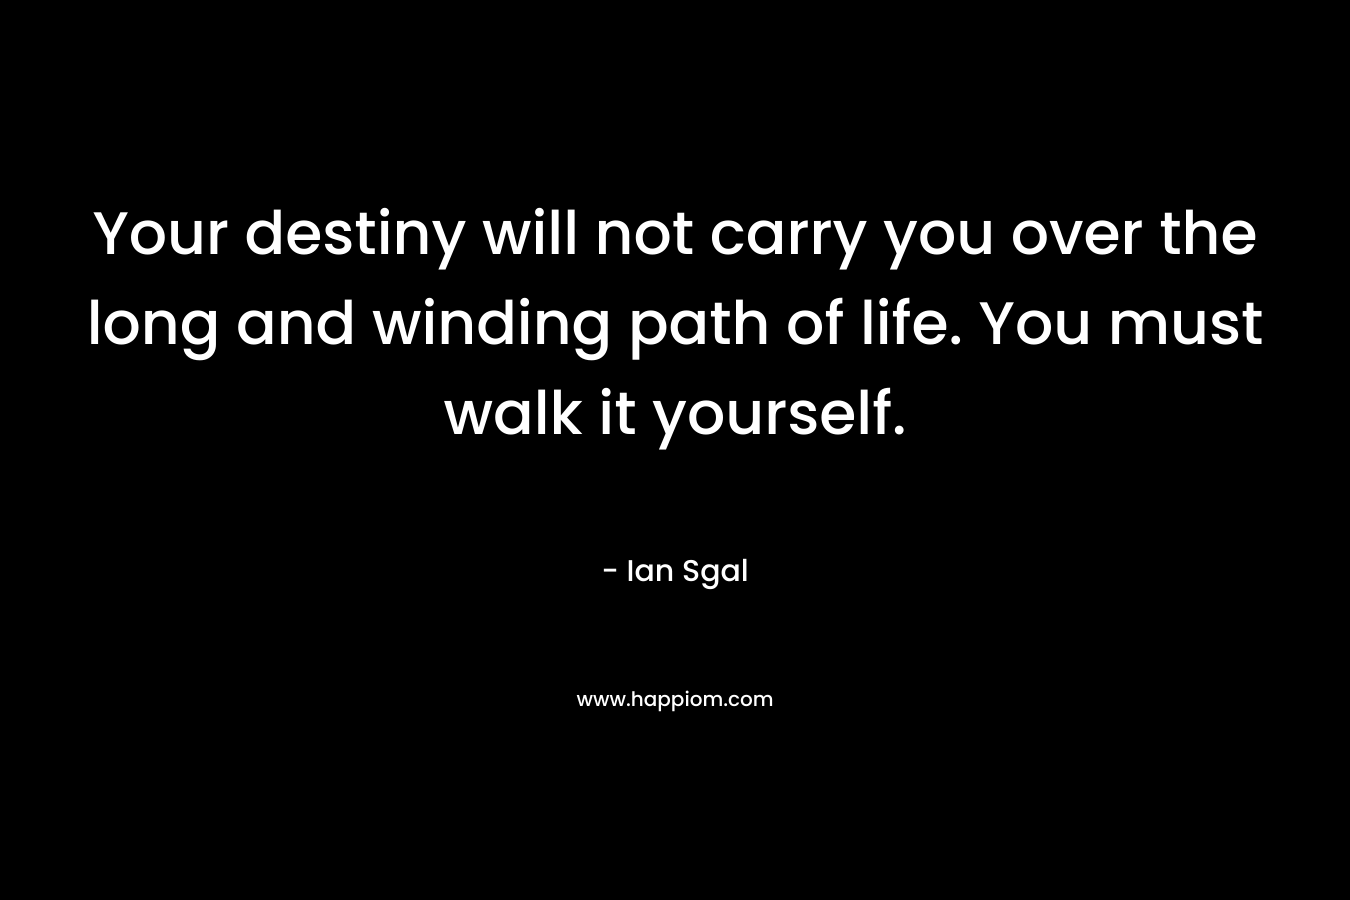 Your destiny will not carry you over the long and winding path of life. You must walk it yourself. – Ian Sgal